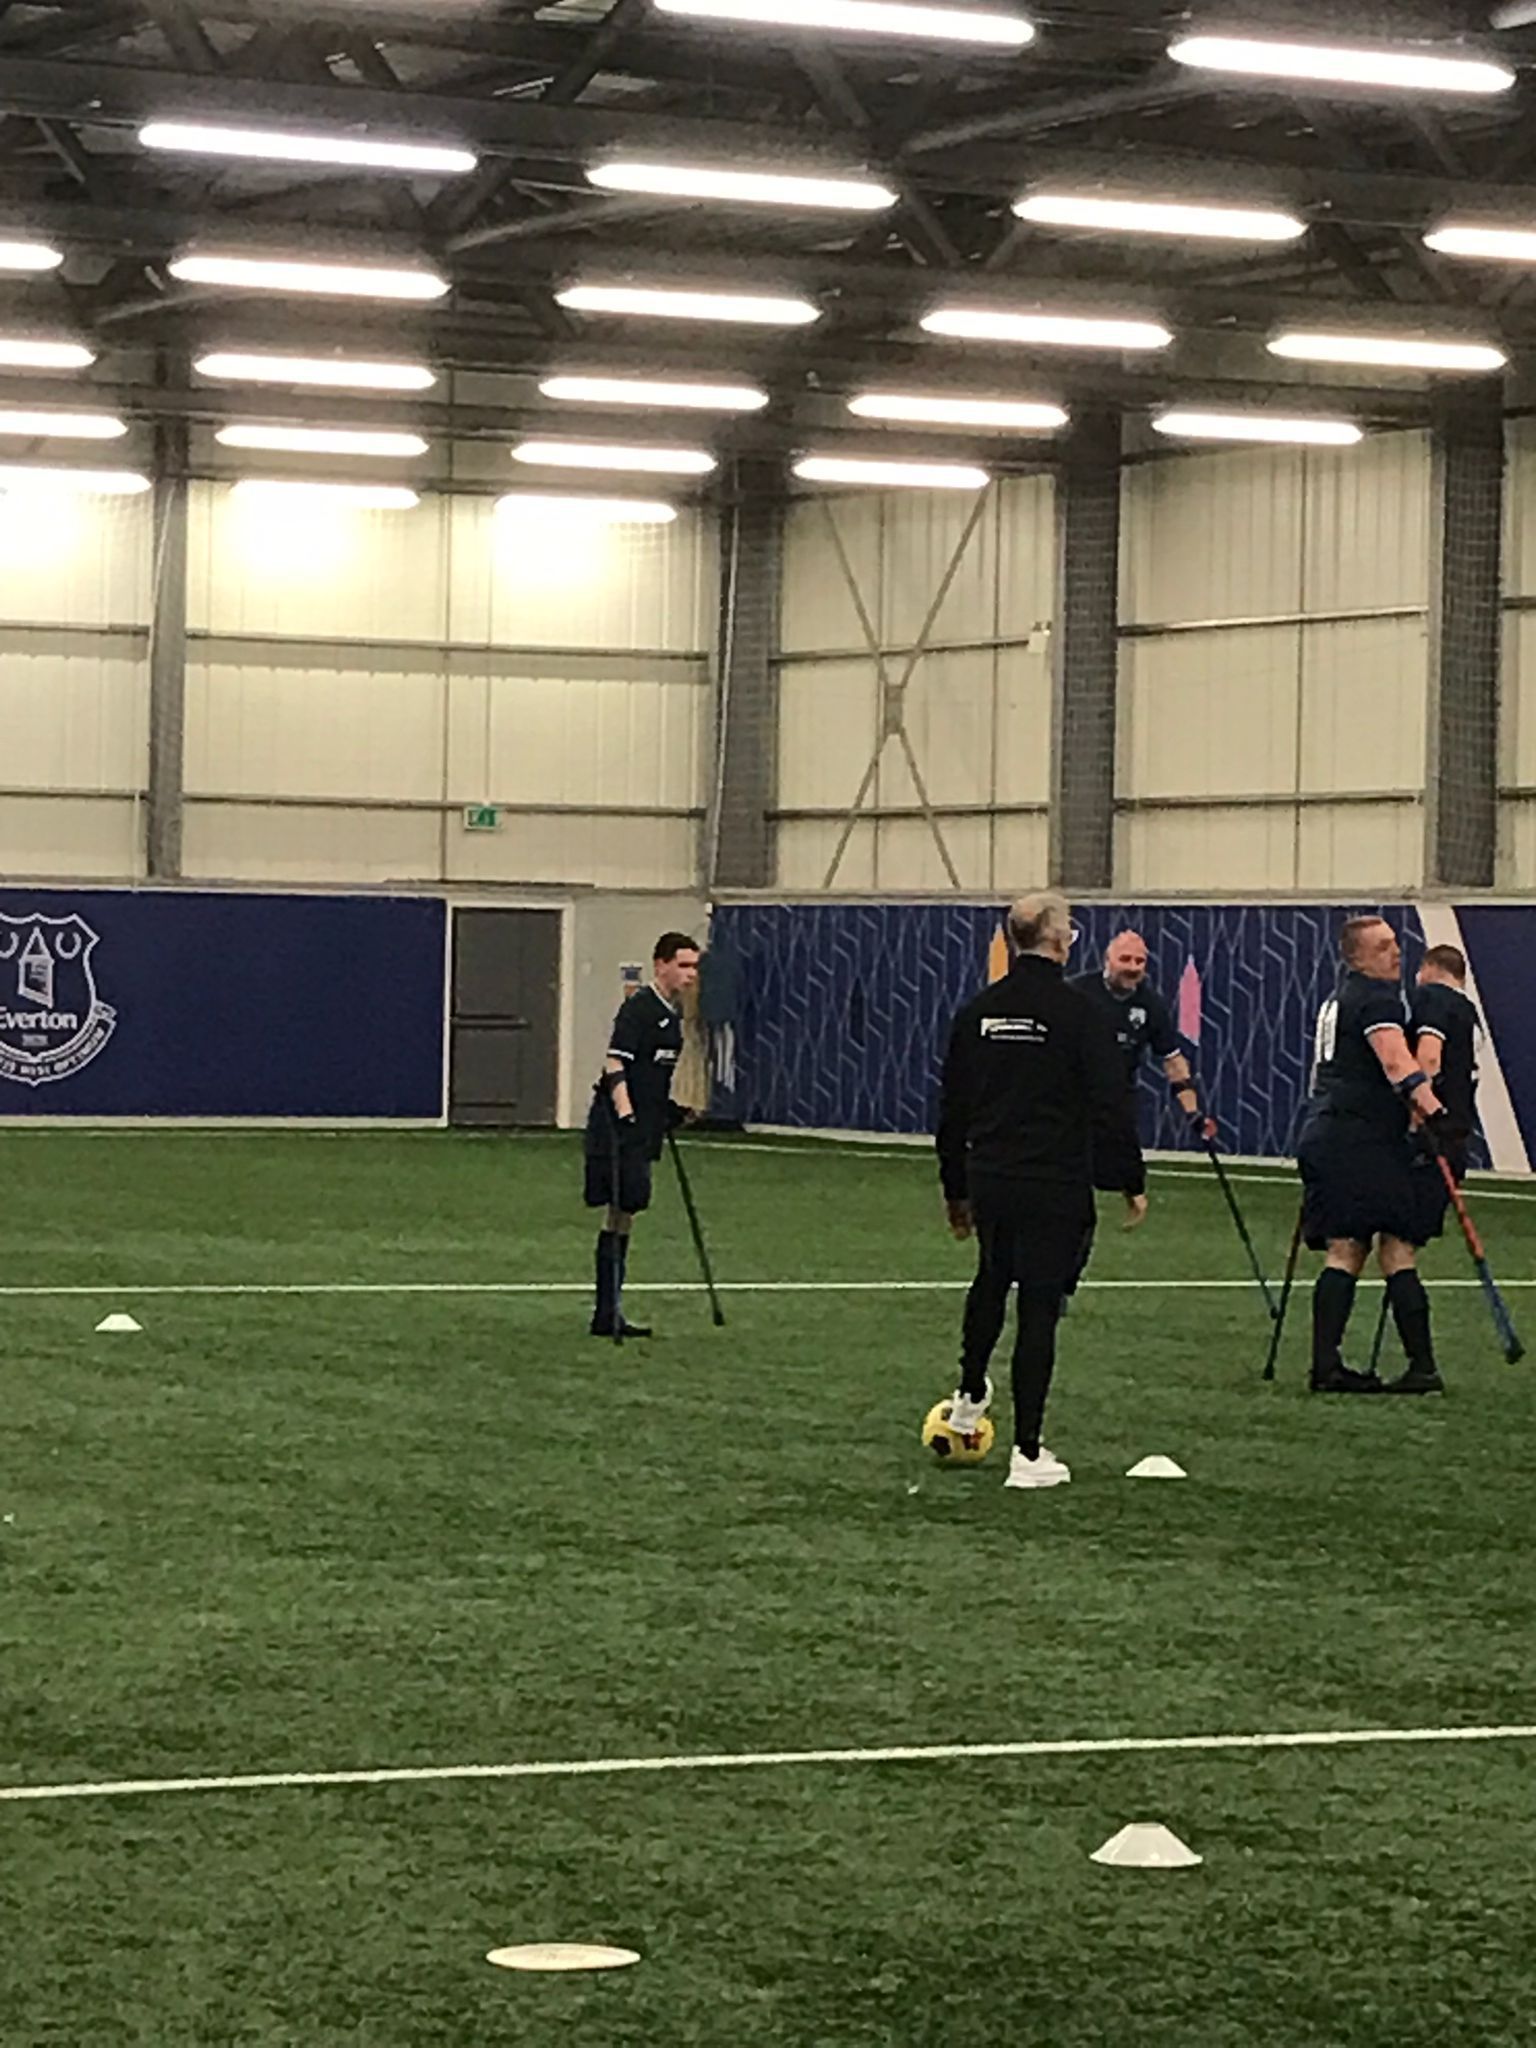 Connor was invited to train at Everton after he took up amputee football following his cancer treatment.